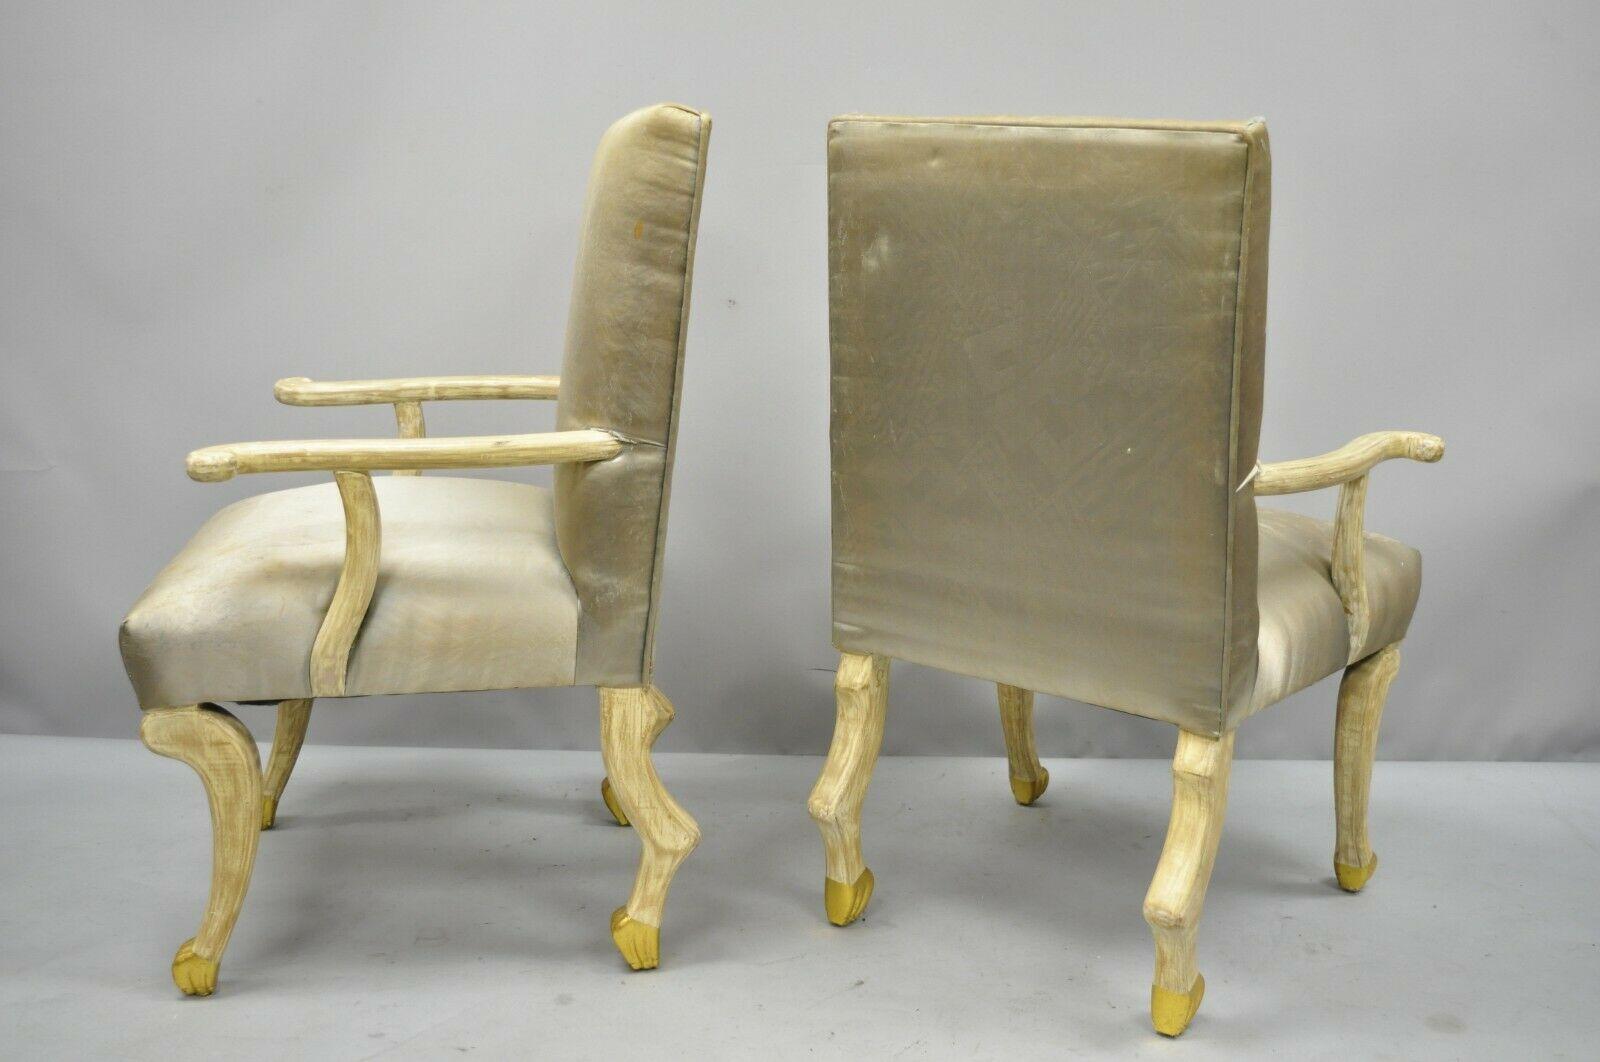 8 Hoof Paw Foot Regency Dining Chairs After the Etruscan Chair by John Dickinson 2